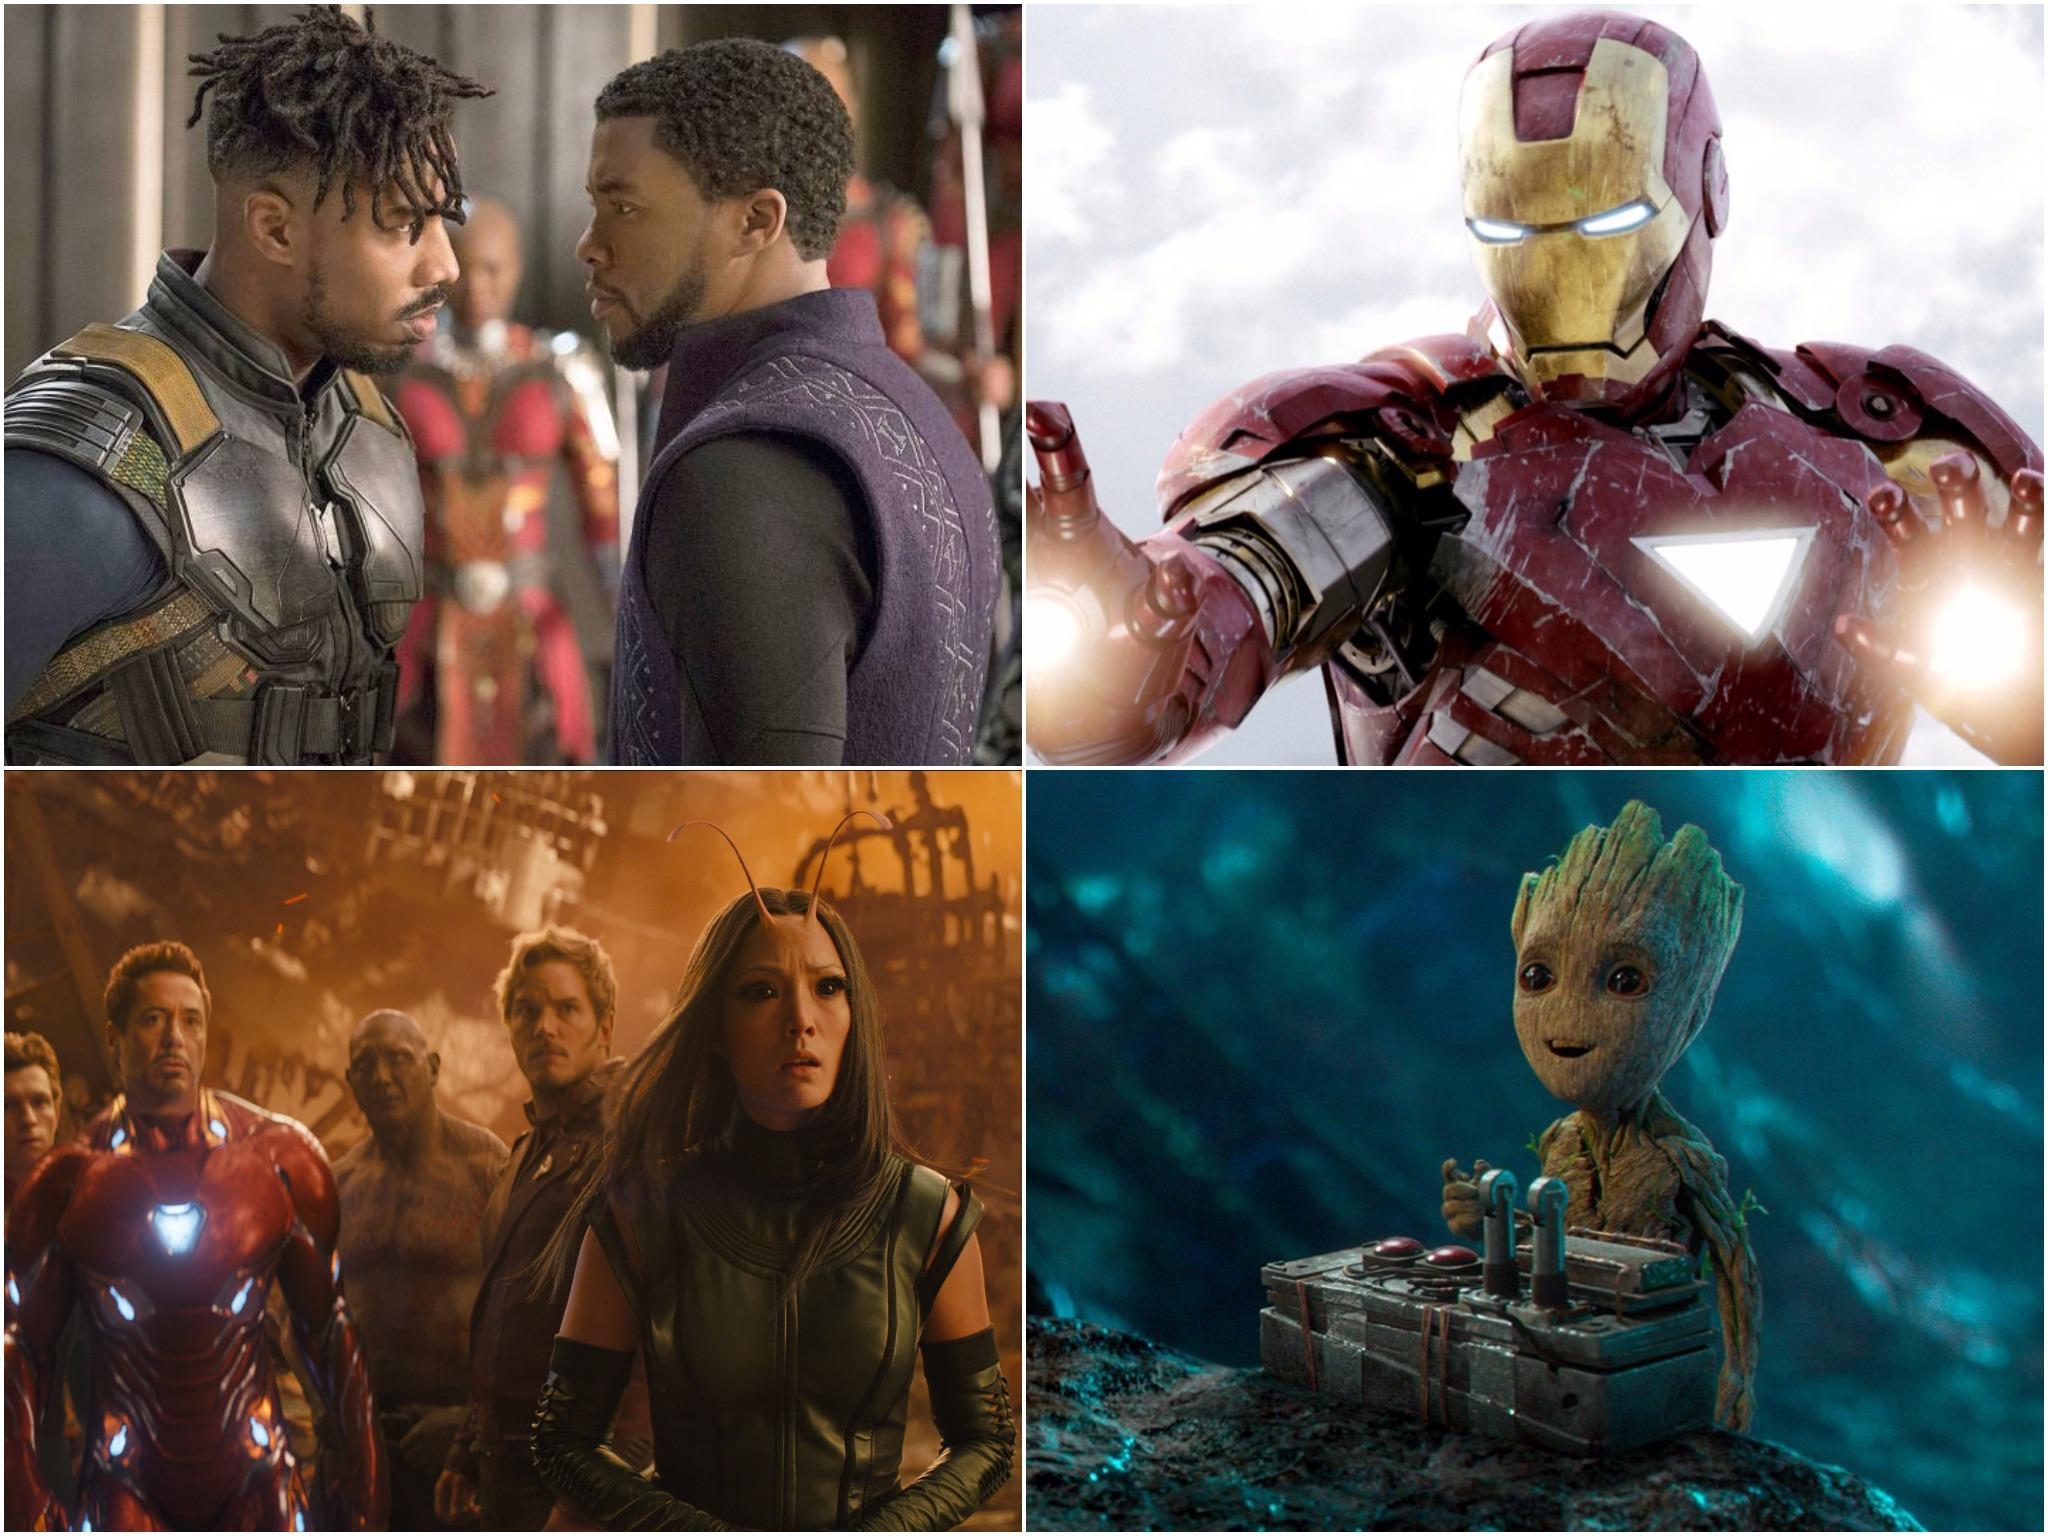 Marvel Cinematic Universe: Every film to date ranked, from worst